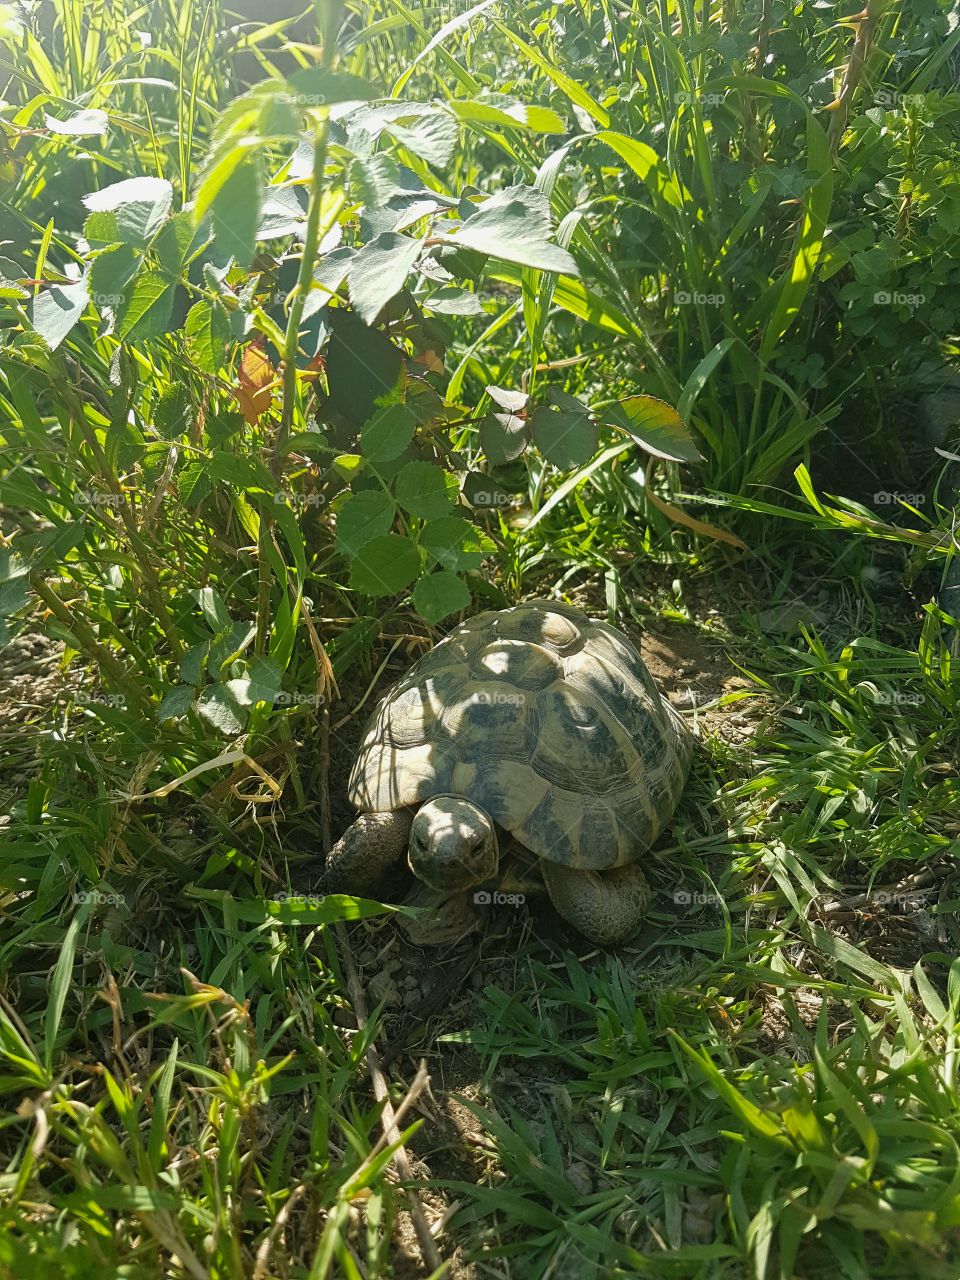 Turtle in the grass in a sunny day